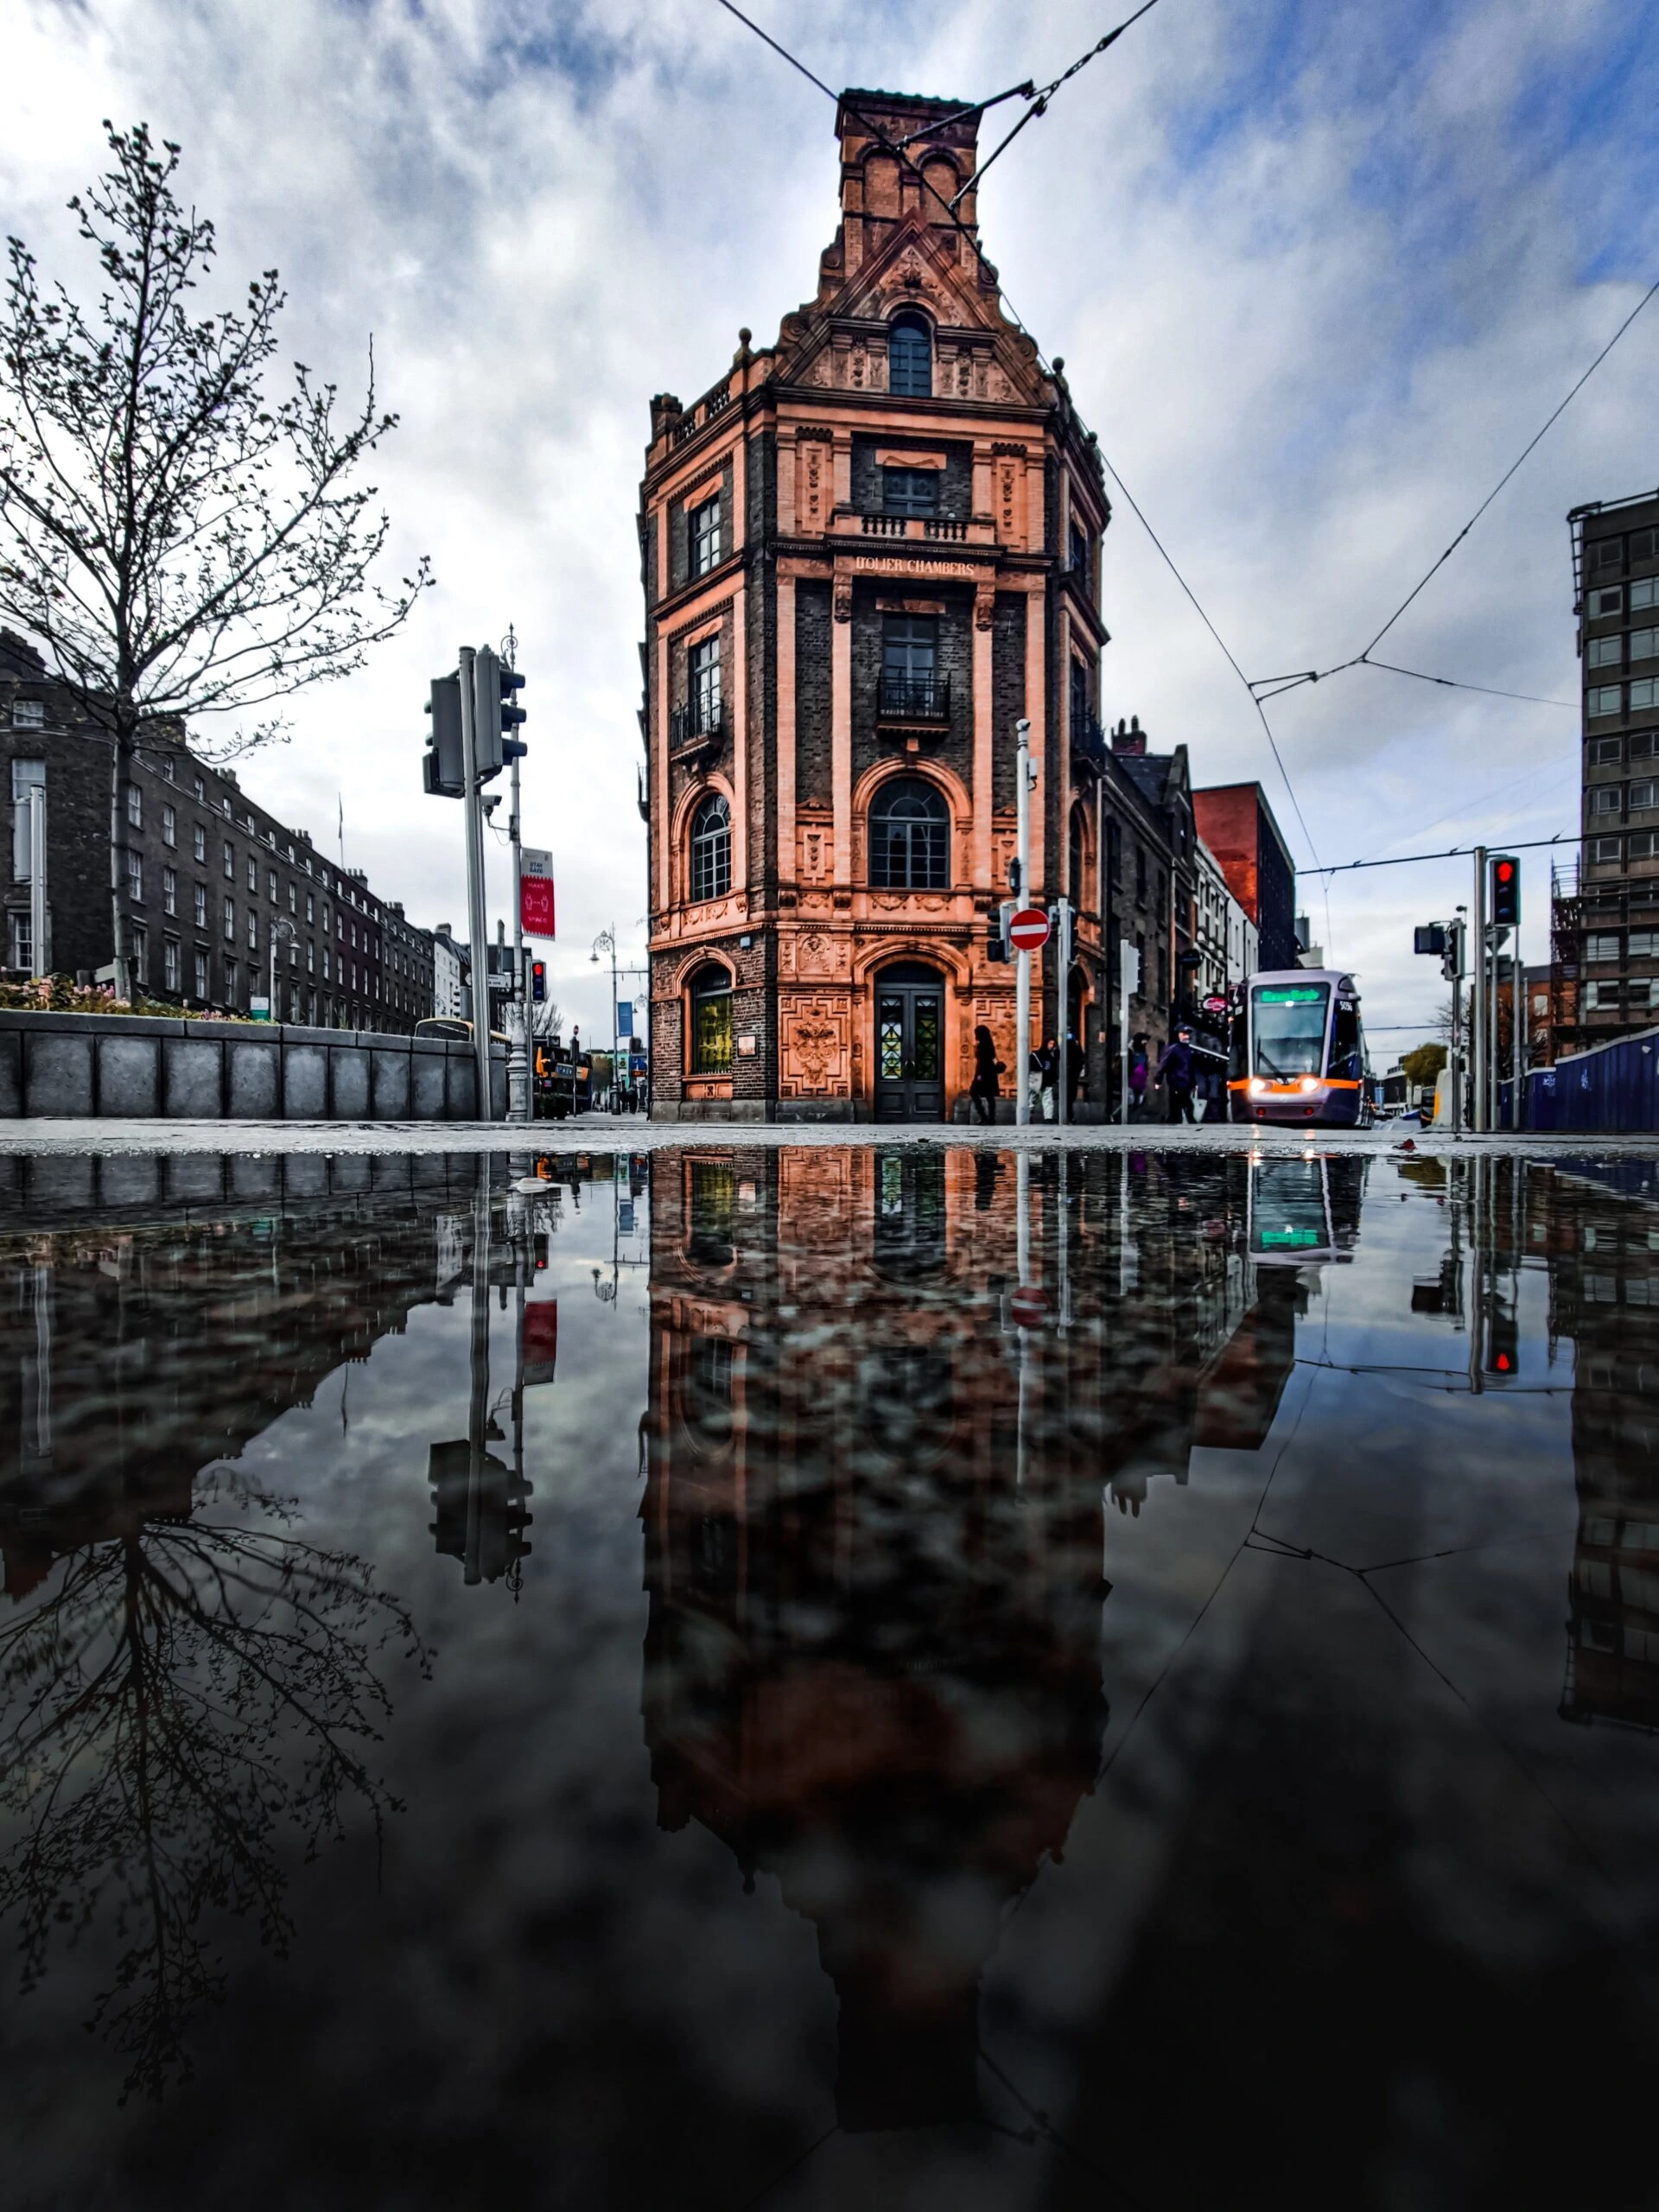 conor-luddy-Dublin city street level after rain with metro in frame-unsplash